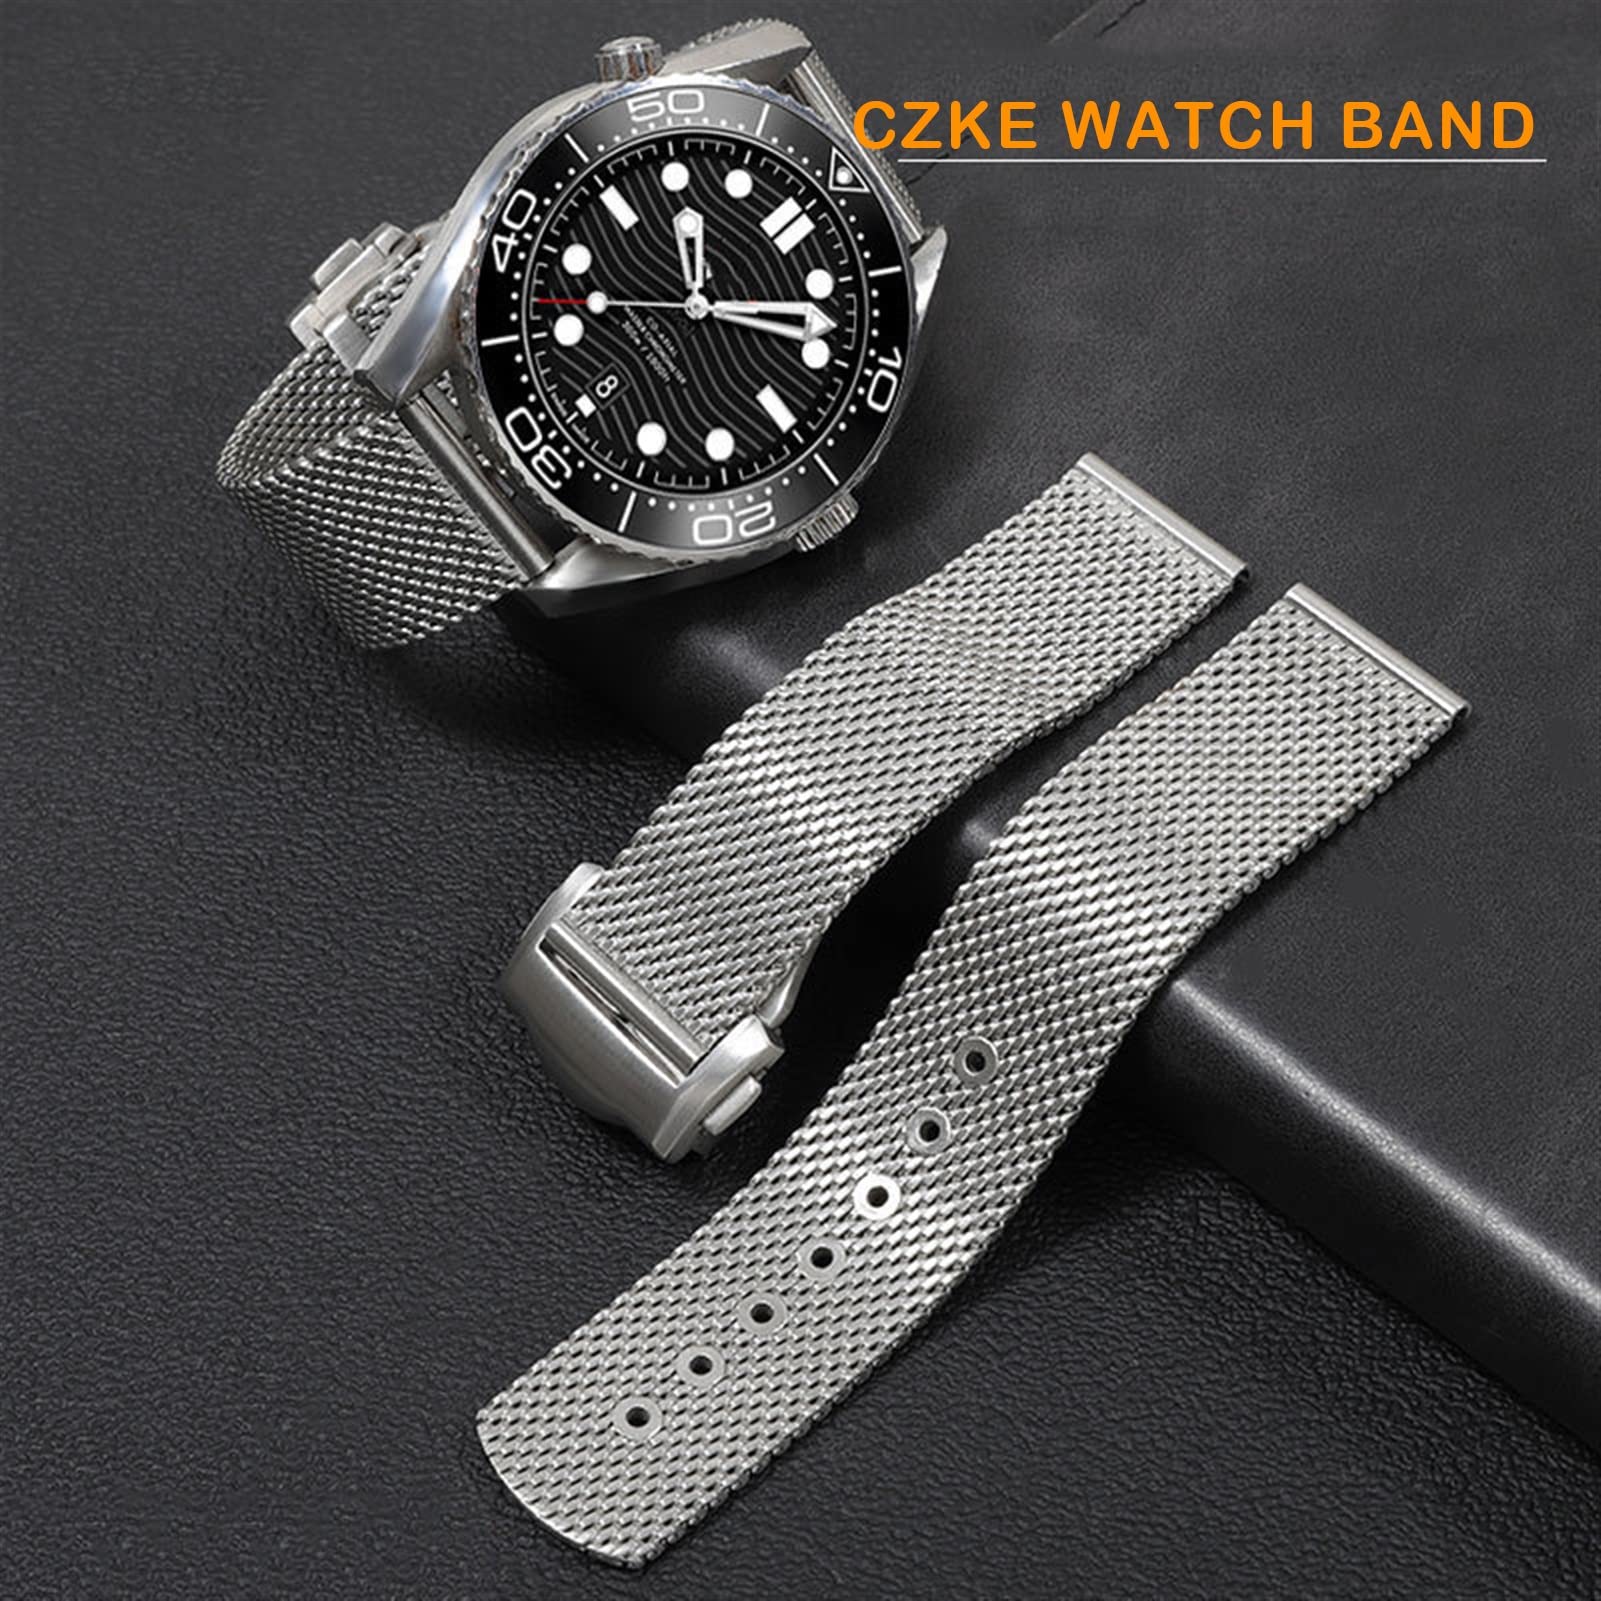 SKM Chain Watch Accessories Strap for Omega 007 Seamaster Diver 300 Watch Band Replace 20mm 22mm Milanese Stainless Bracelet (Color : Silver, Size : 20mm)